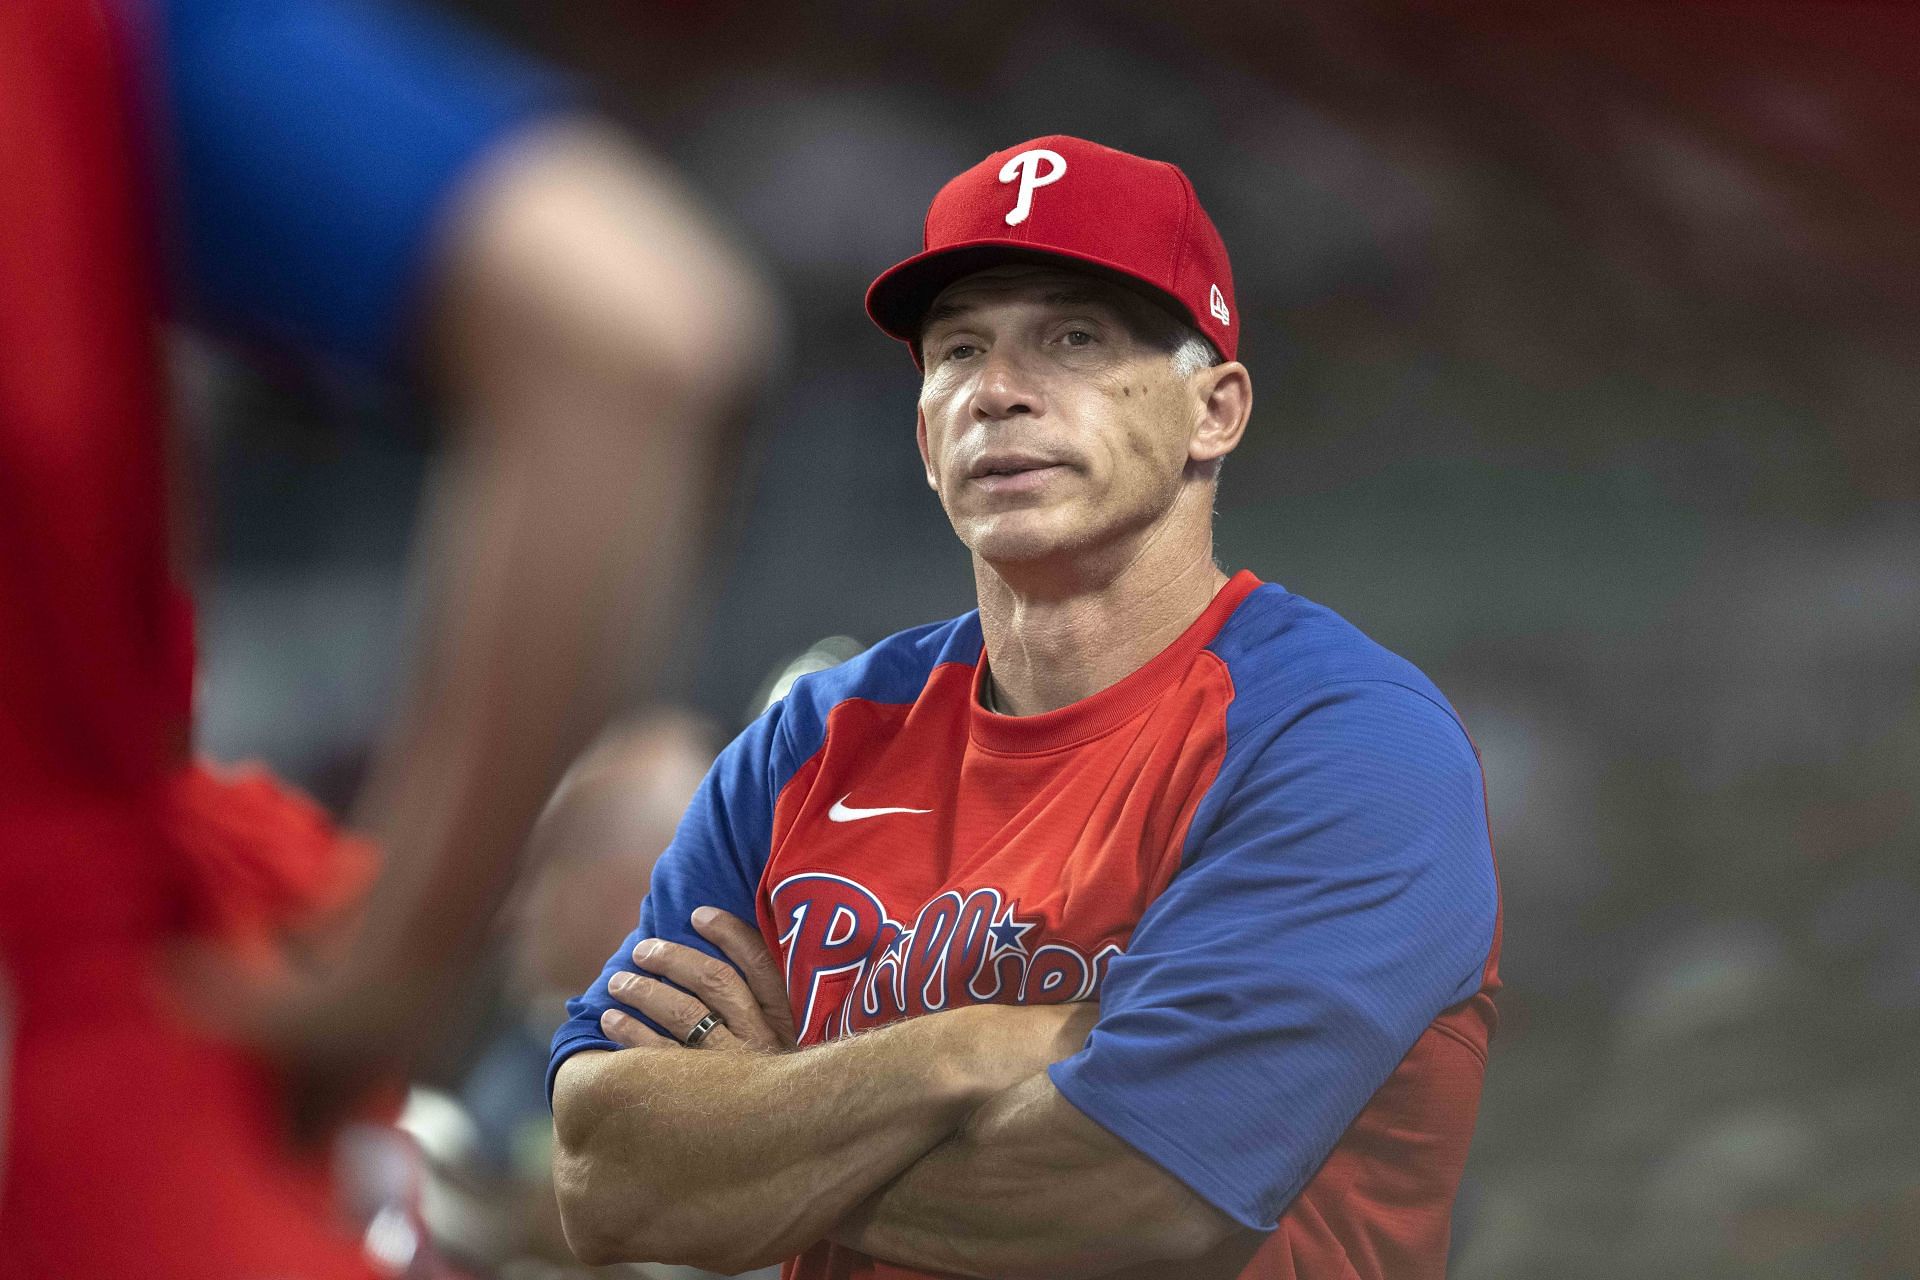 Joe Girardi was fired by the Phillies earlier this season, and the team has improved drastically since.